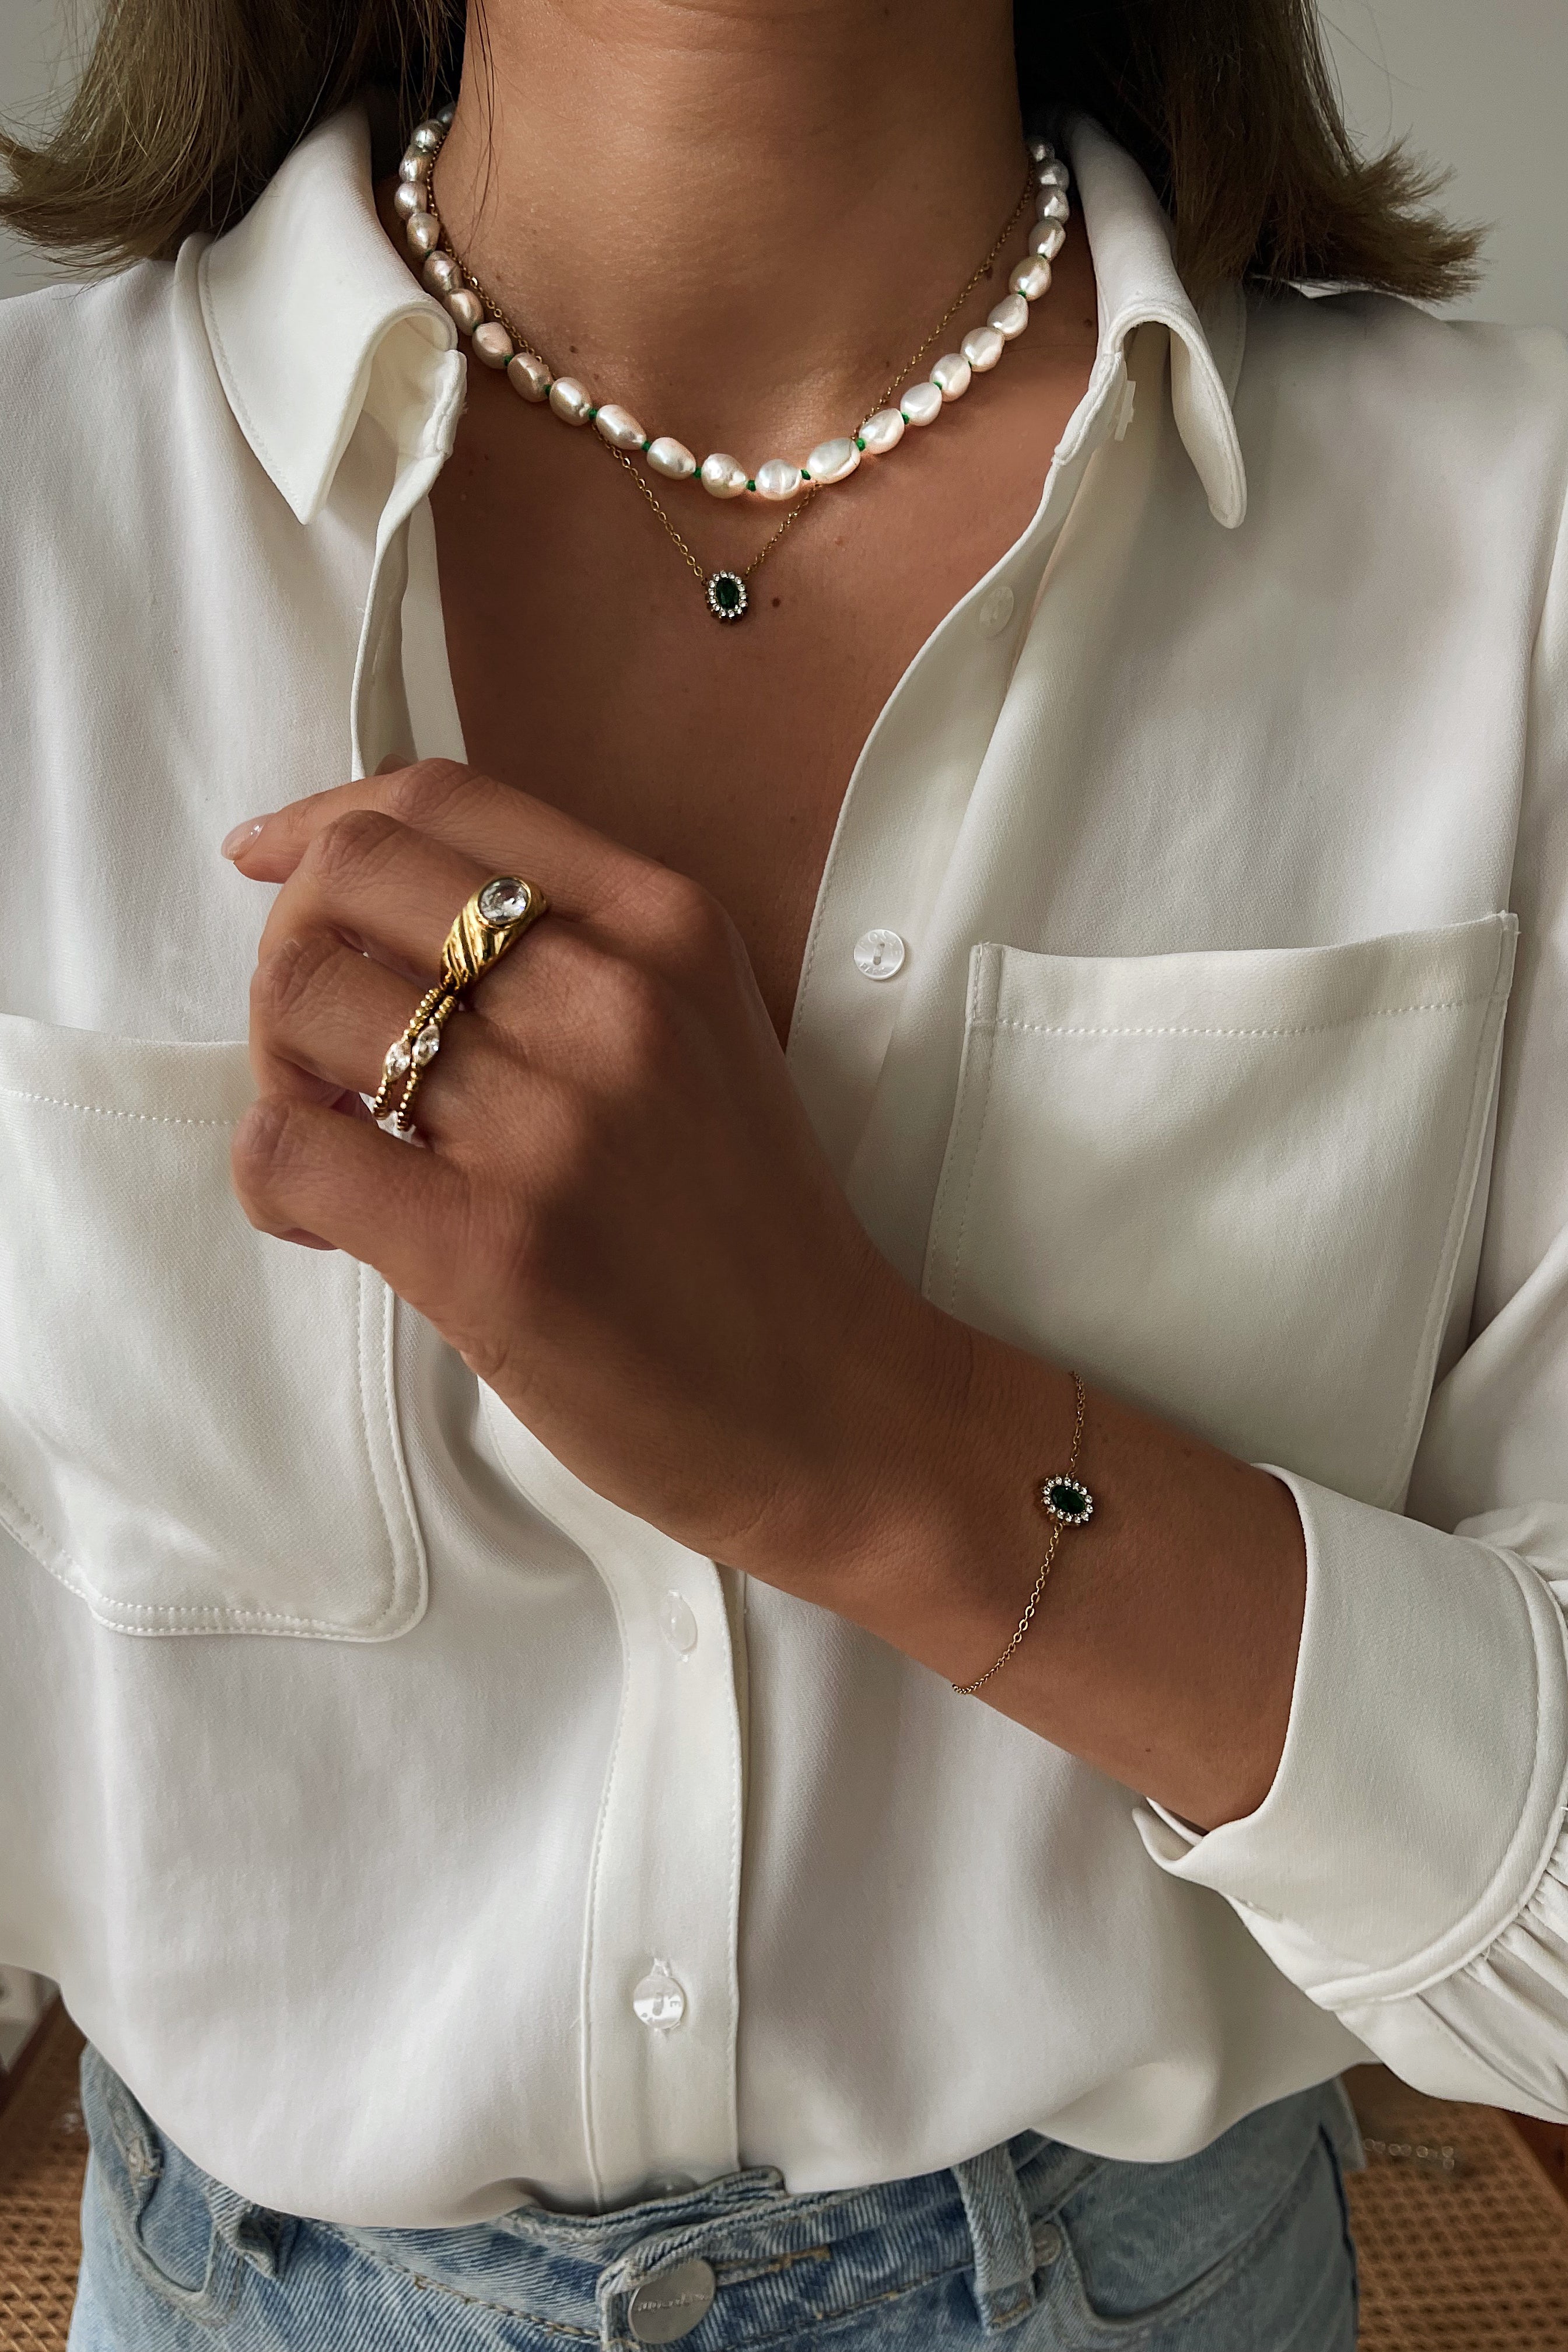 Phoebe Ring - Boutique Minimaliste has waterproof, durable, elegant and vintage inspired jewelry